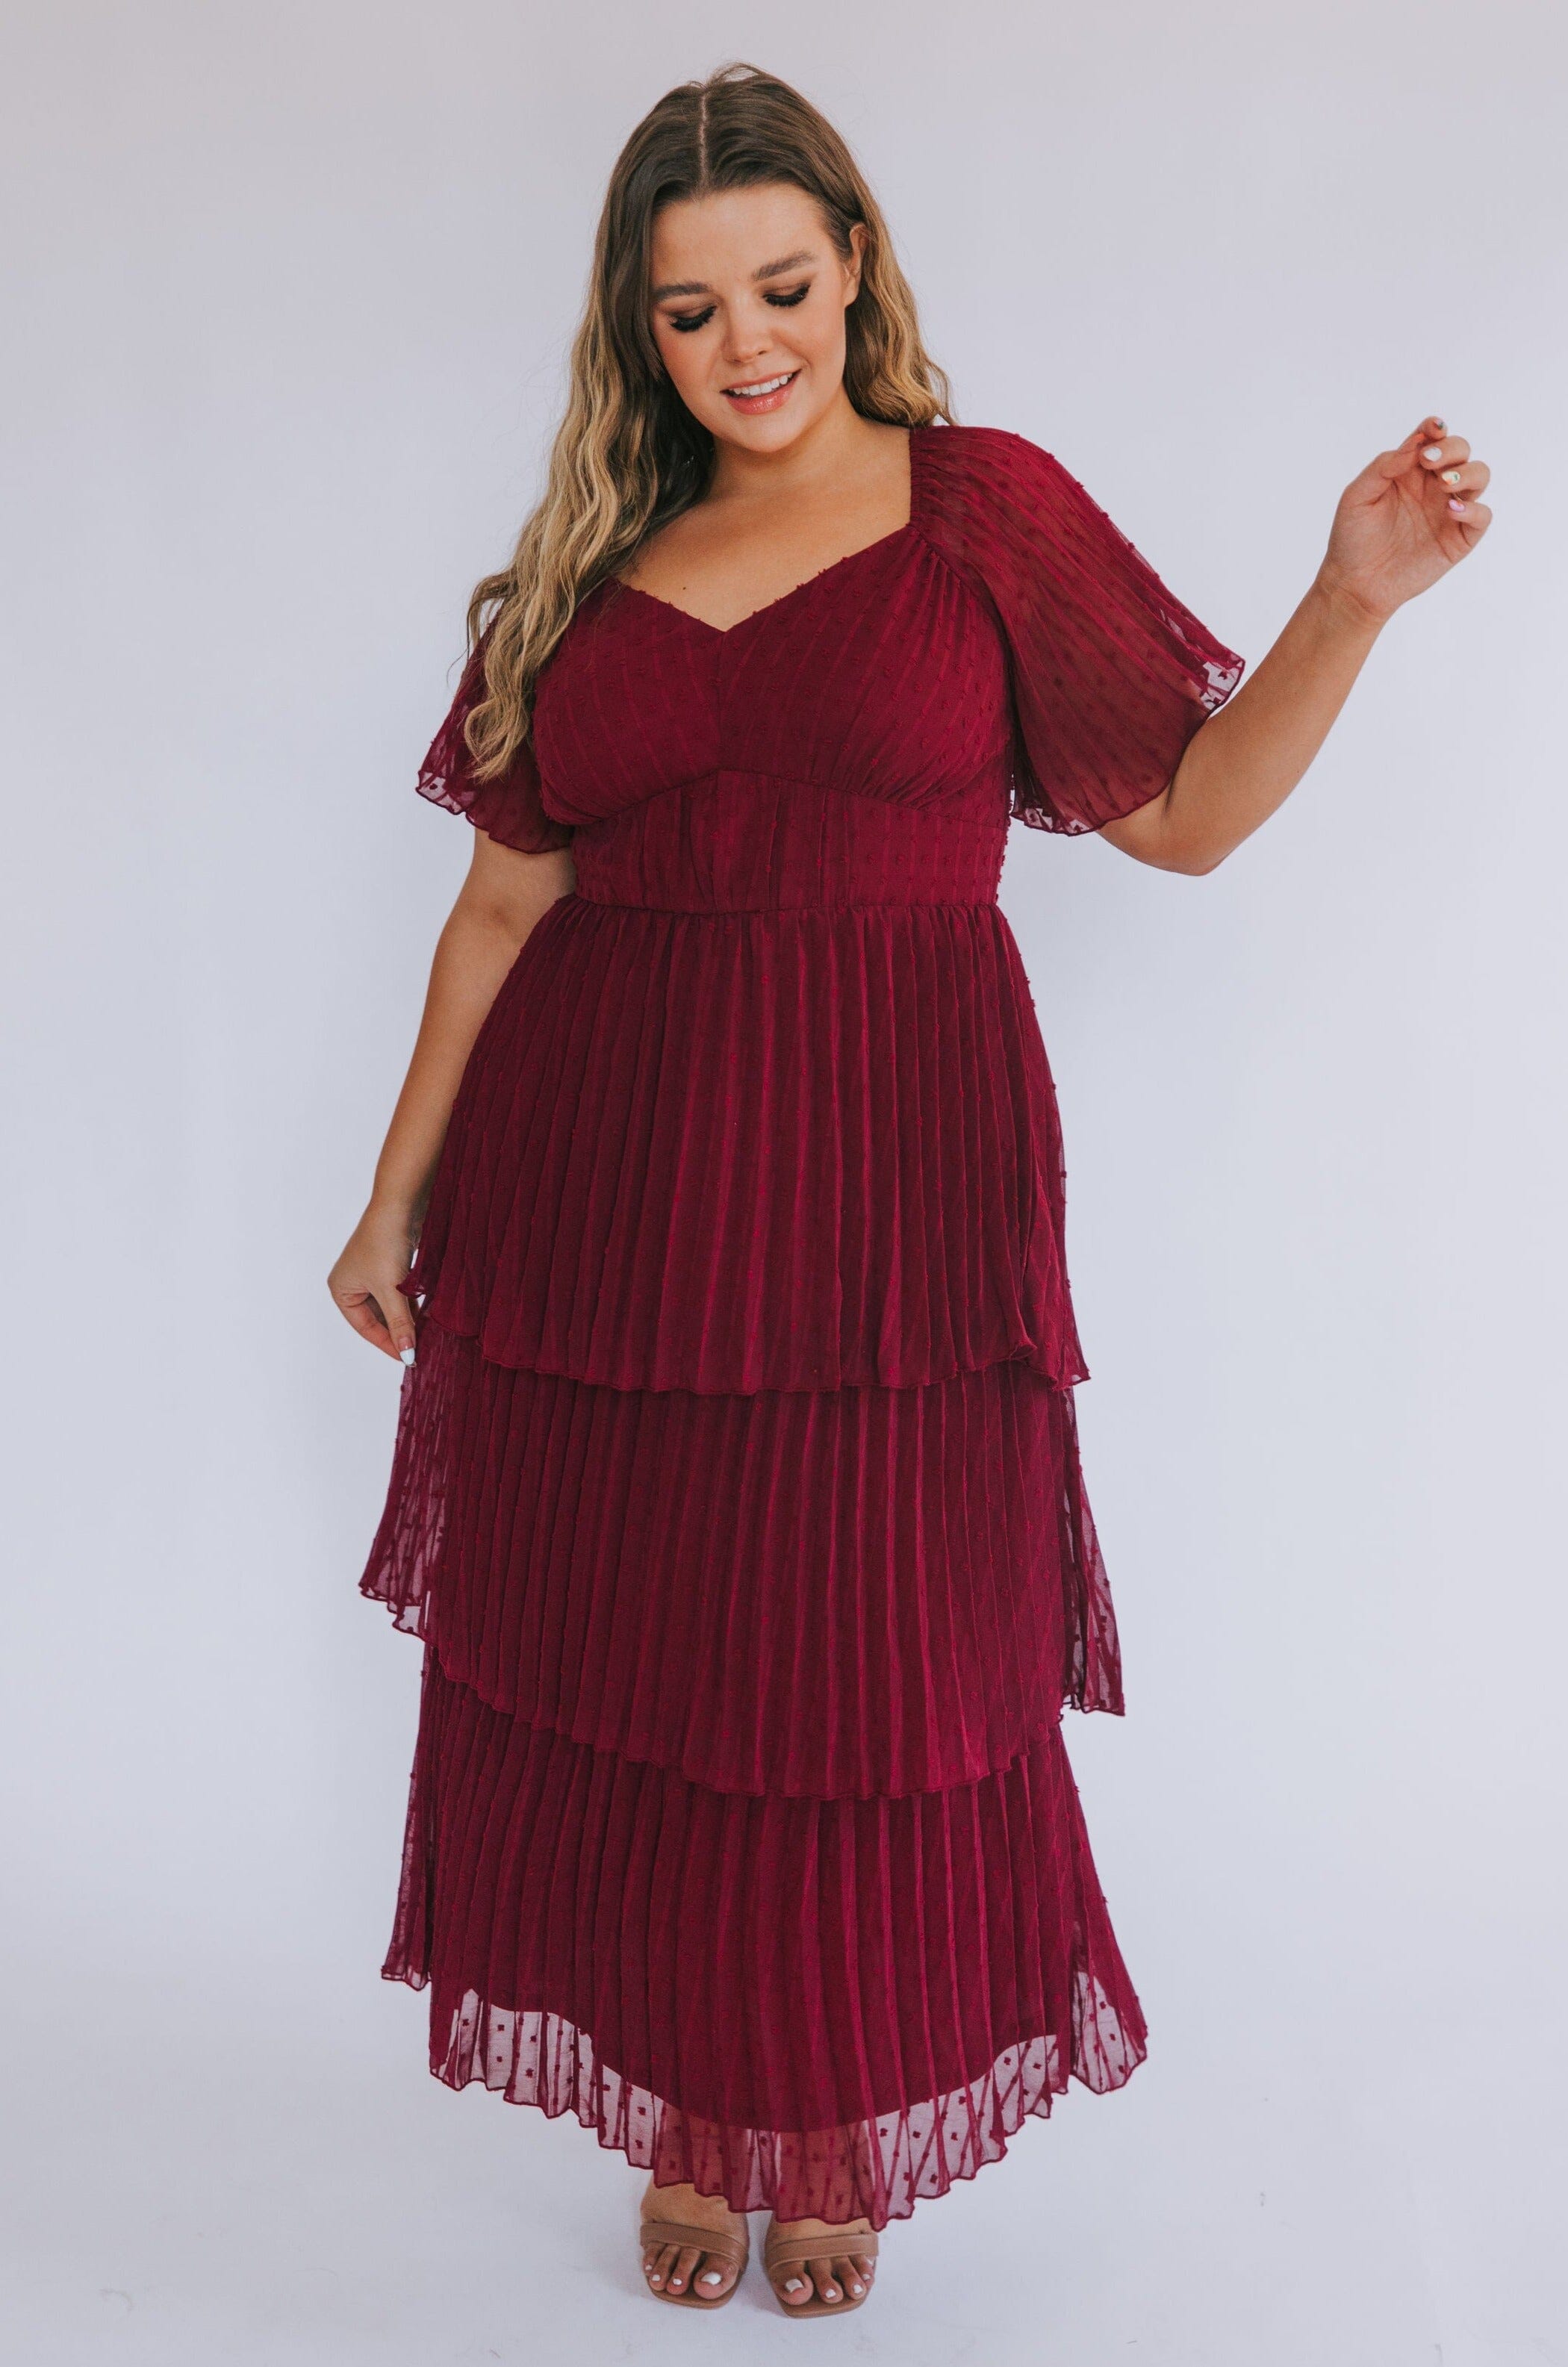 ONE LOVED BABE - Warm Wishes Dress - New Colors!